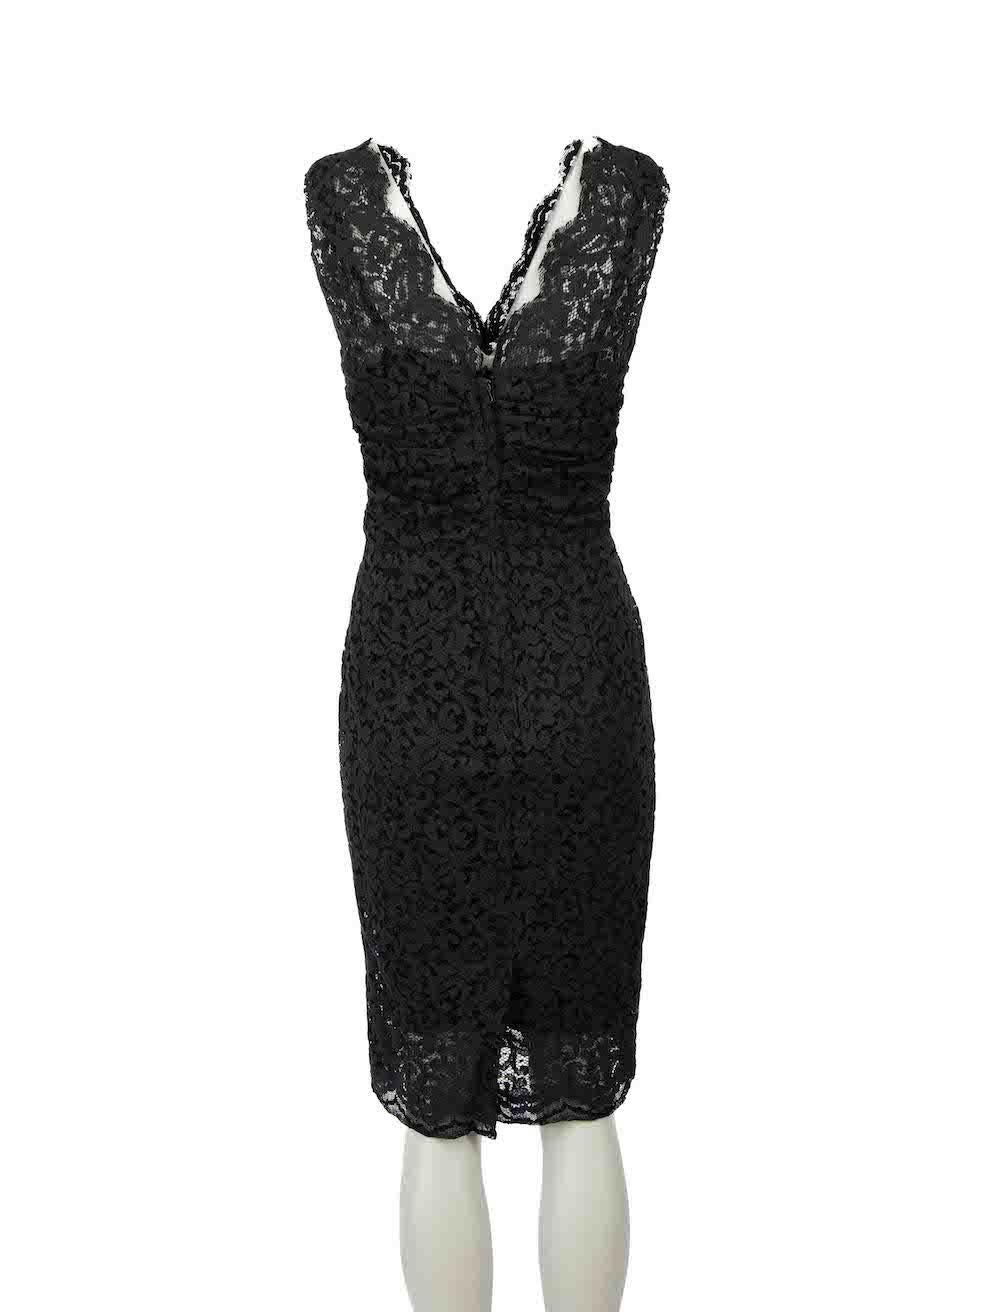 Dolce & Gabbana Navy Lace Ruched Dress Size S In Excellent Condition For Sale In London, GB